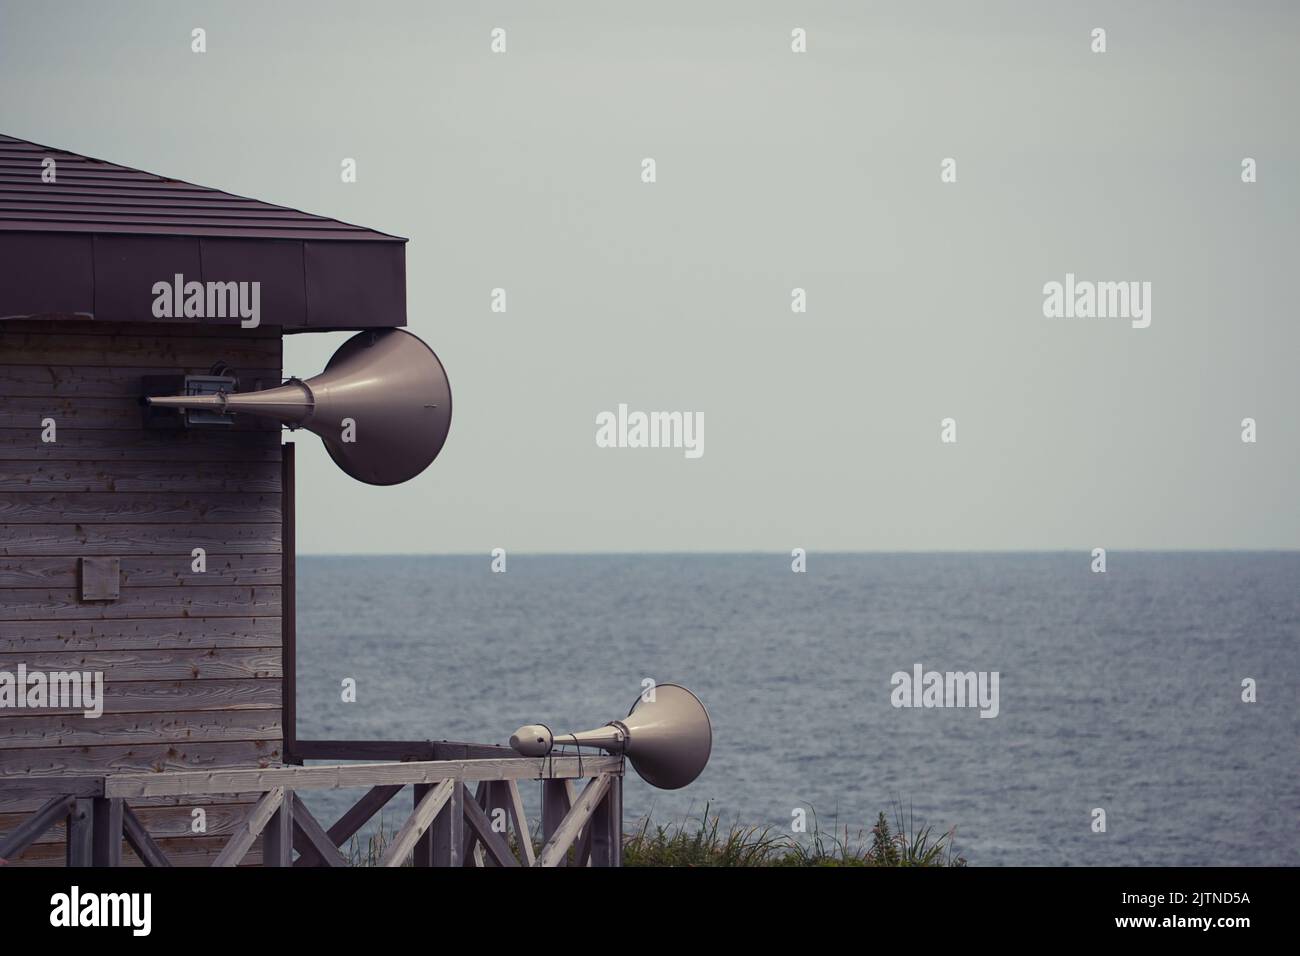 Two early warning system speakers on building by sea, Hokkaido, Japan Stock Photo